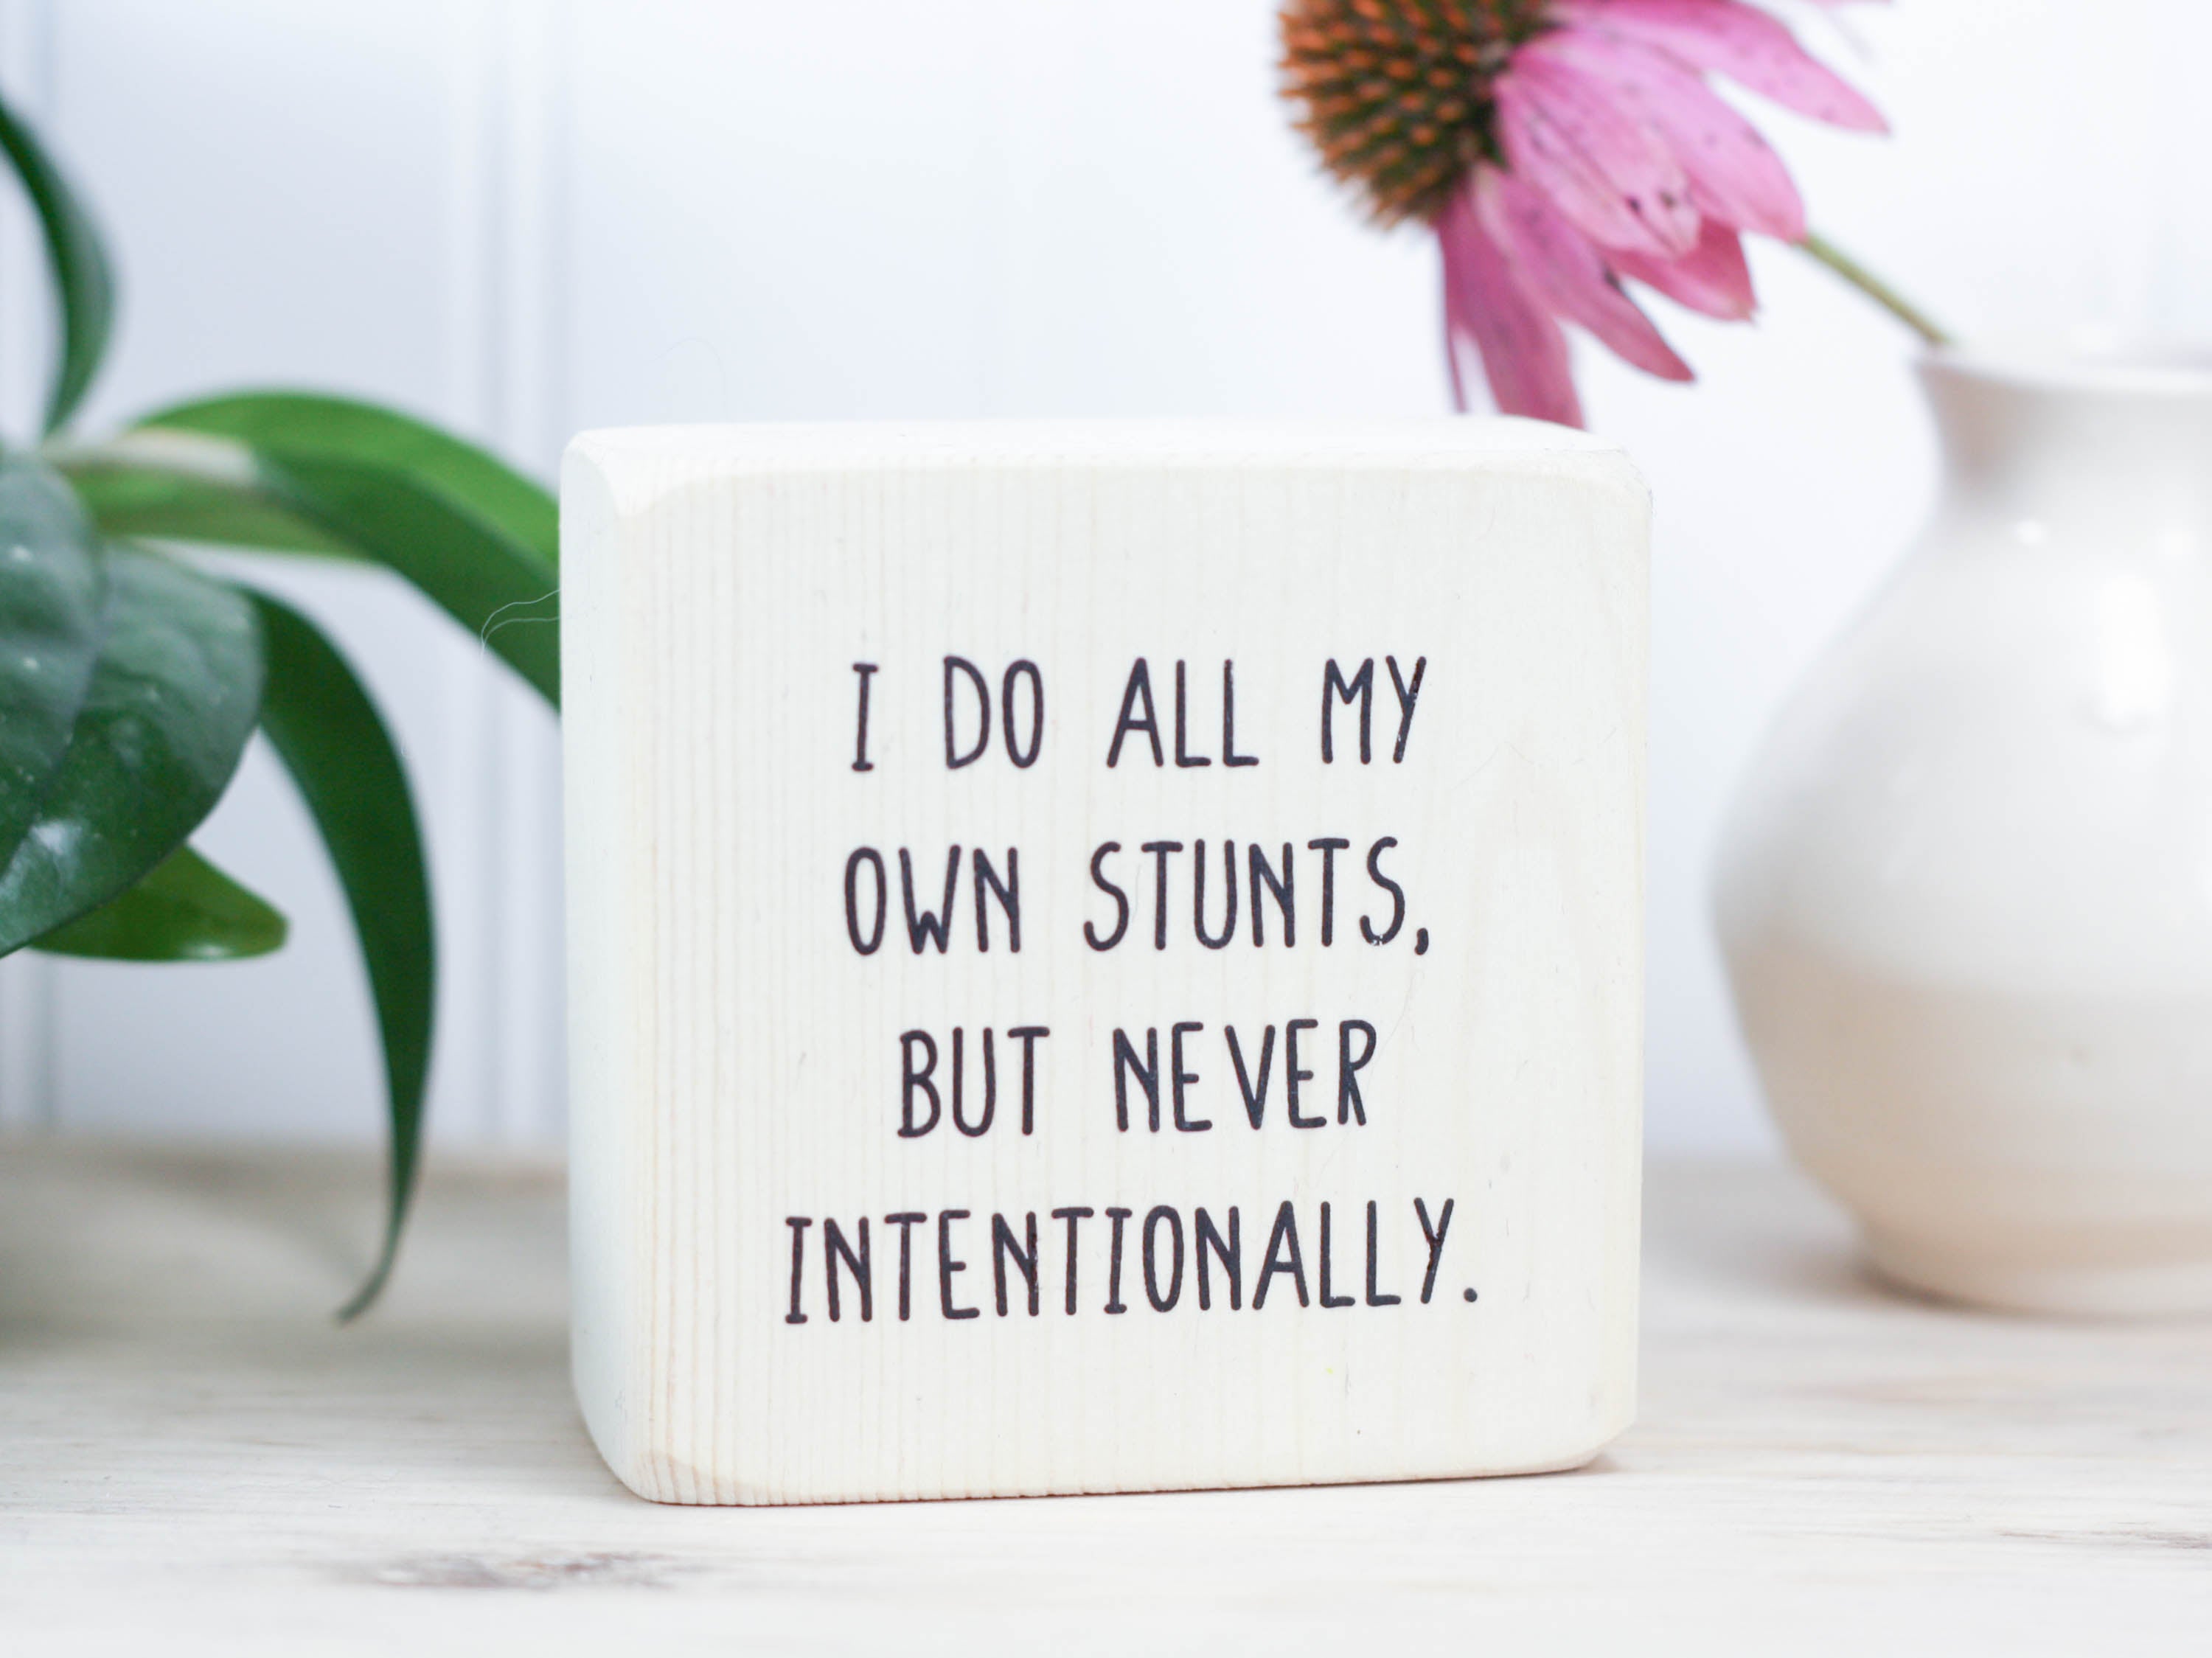 Small, freestanding, whitewash, solid wood sign with funny saying on it "I do all my own stunts, but never intentionally."